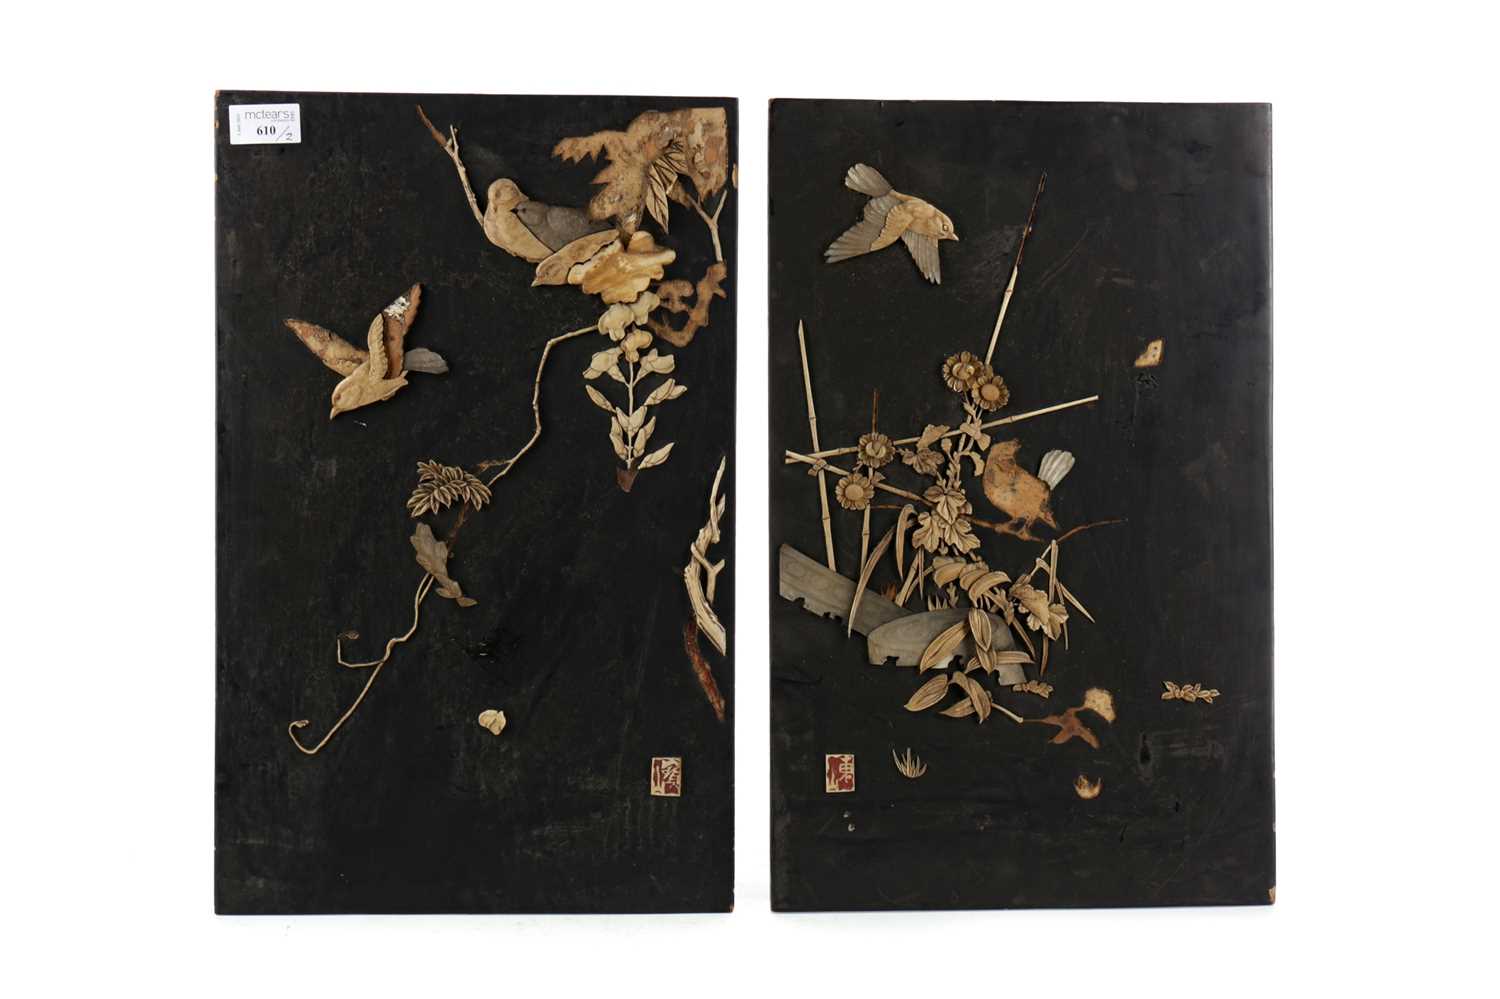 Lot 610 - A PAIR OF EARLY 20TH CENTURY PAIR OF CHINESE WALL PANELS